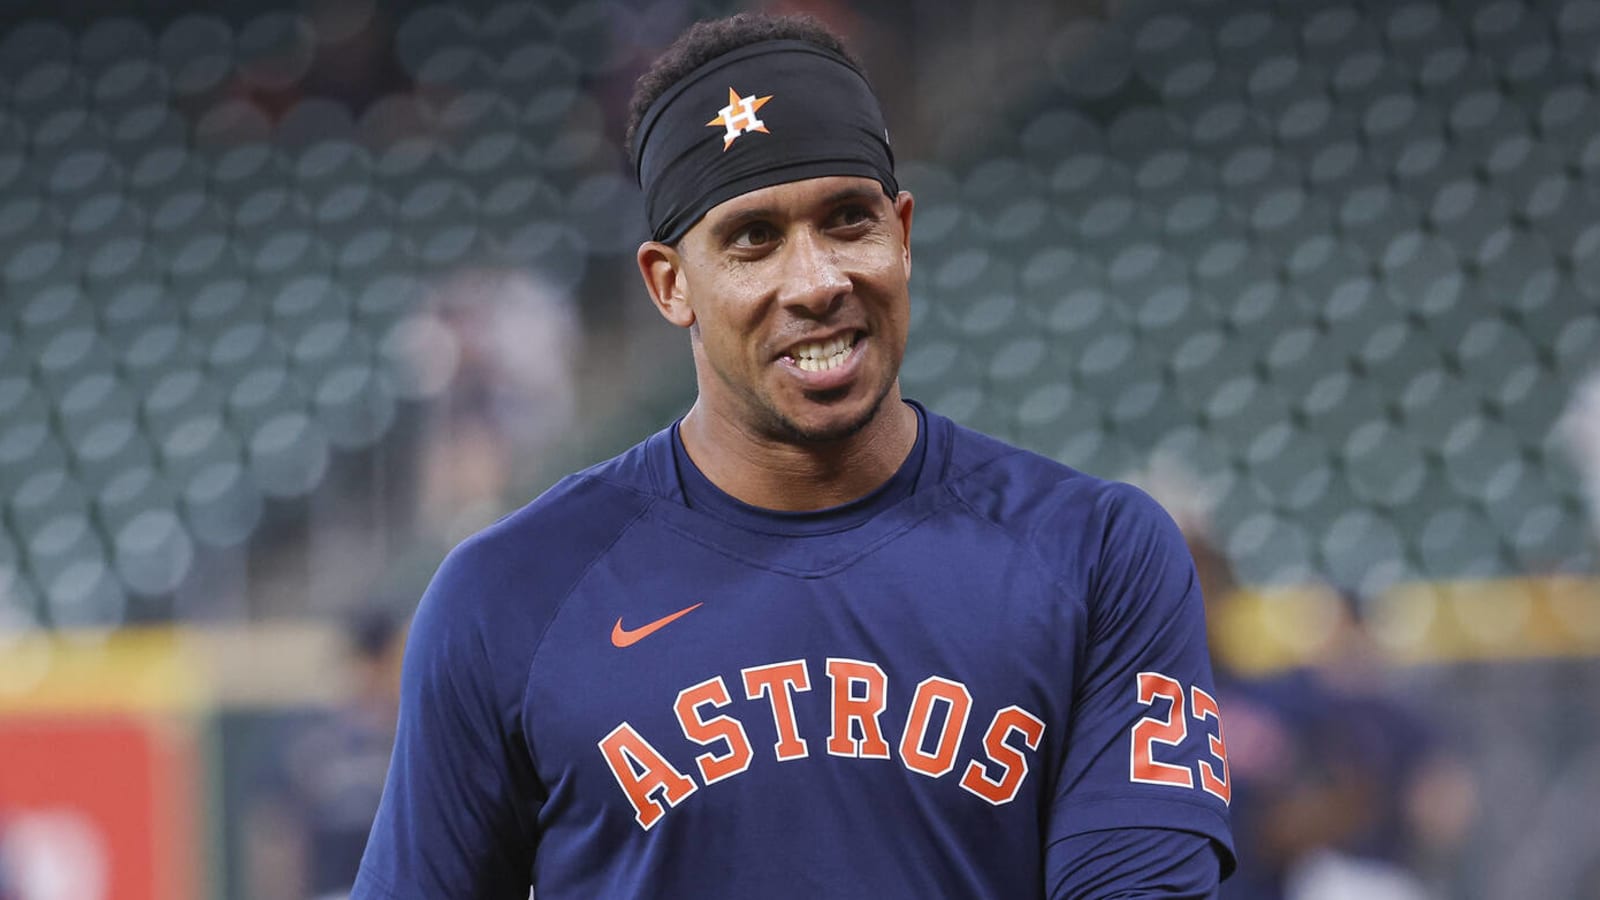 Astros manager provides update on injured outfielder